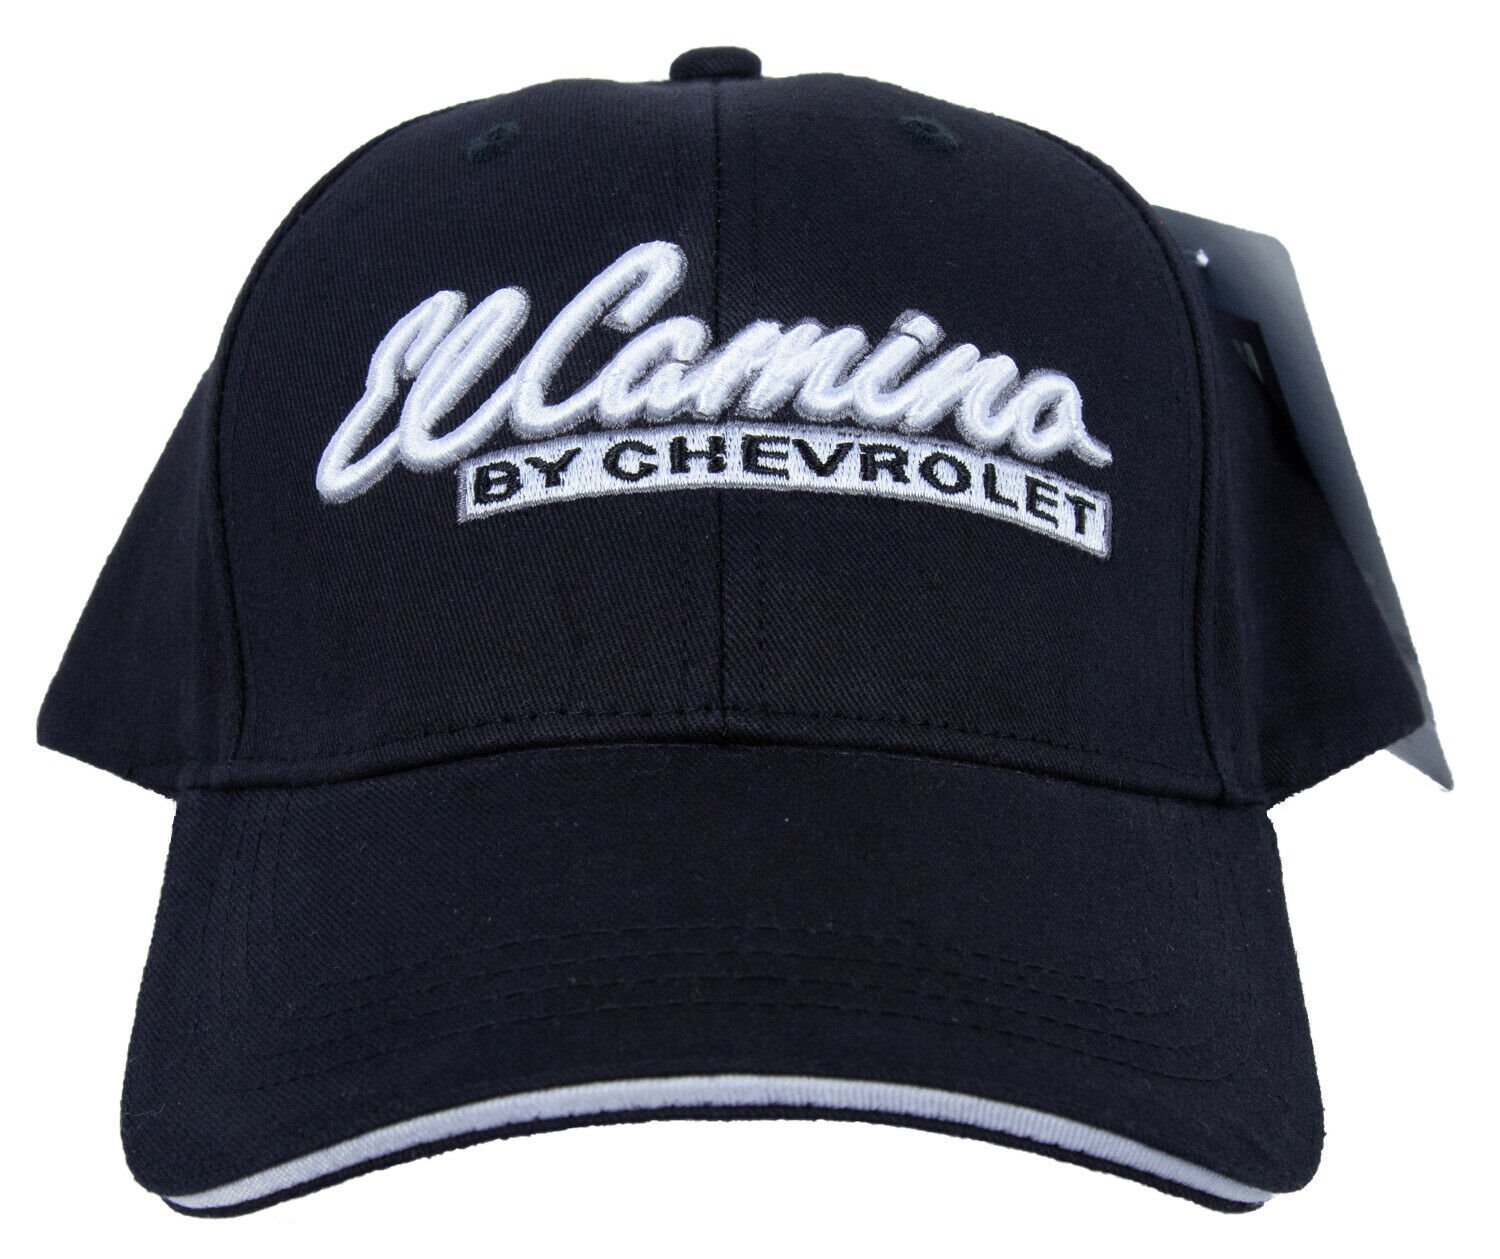 JEGS H241 "El Camino by Chevrolet" Hat